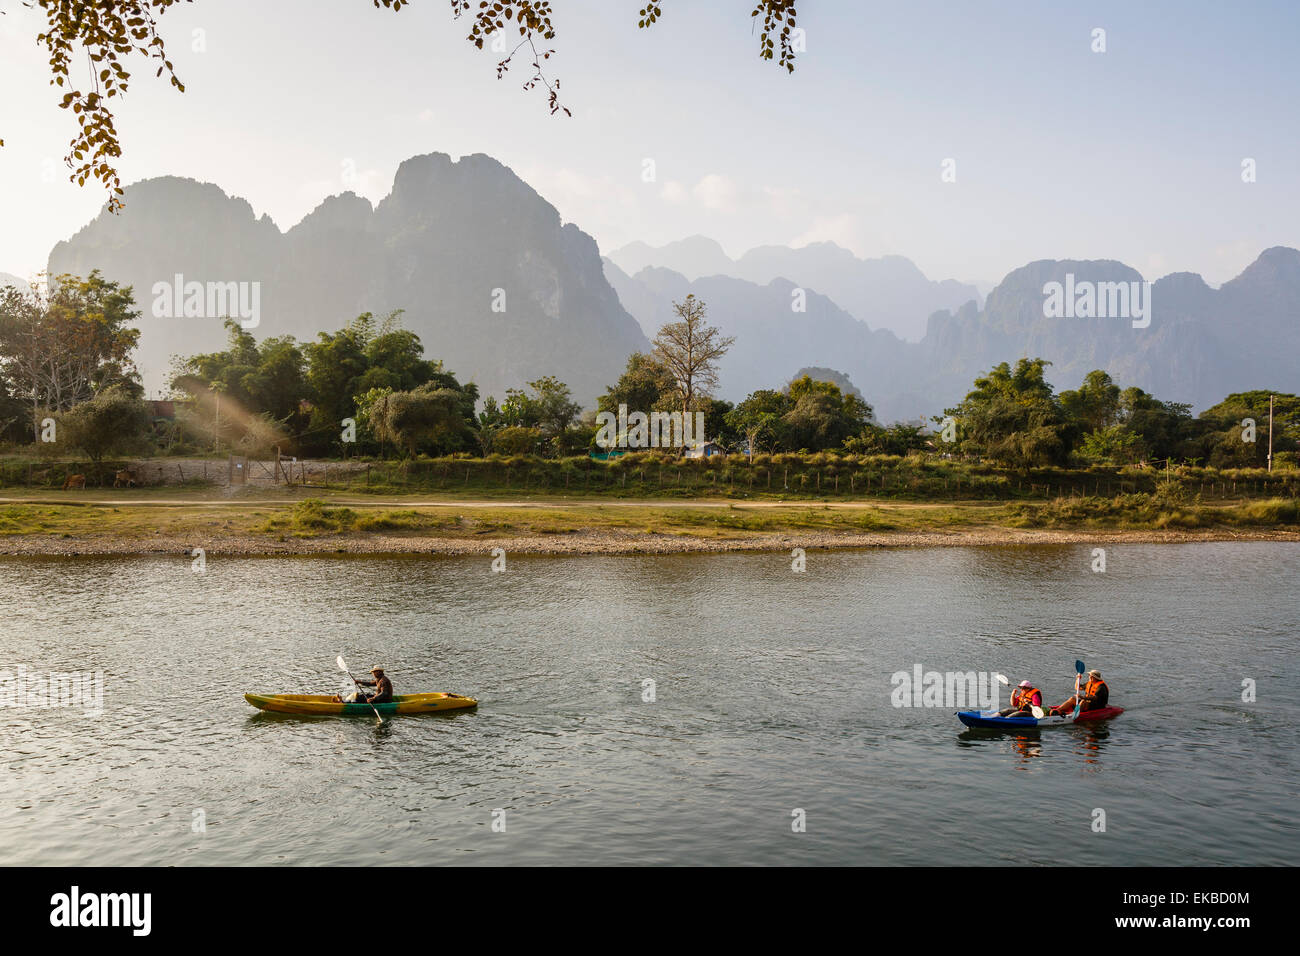 Persone kayaking sul Nam Song River, Vang Vieng, Laos, Indocina, Asia sud-orientale, Asia Foto Stock